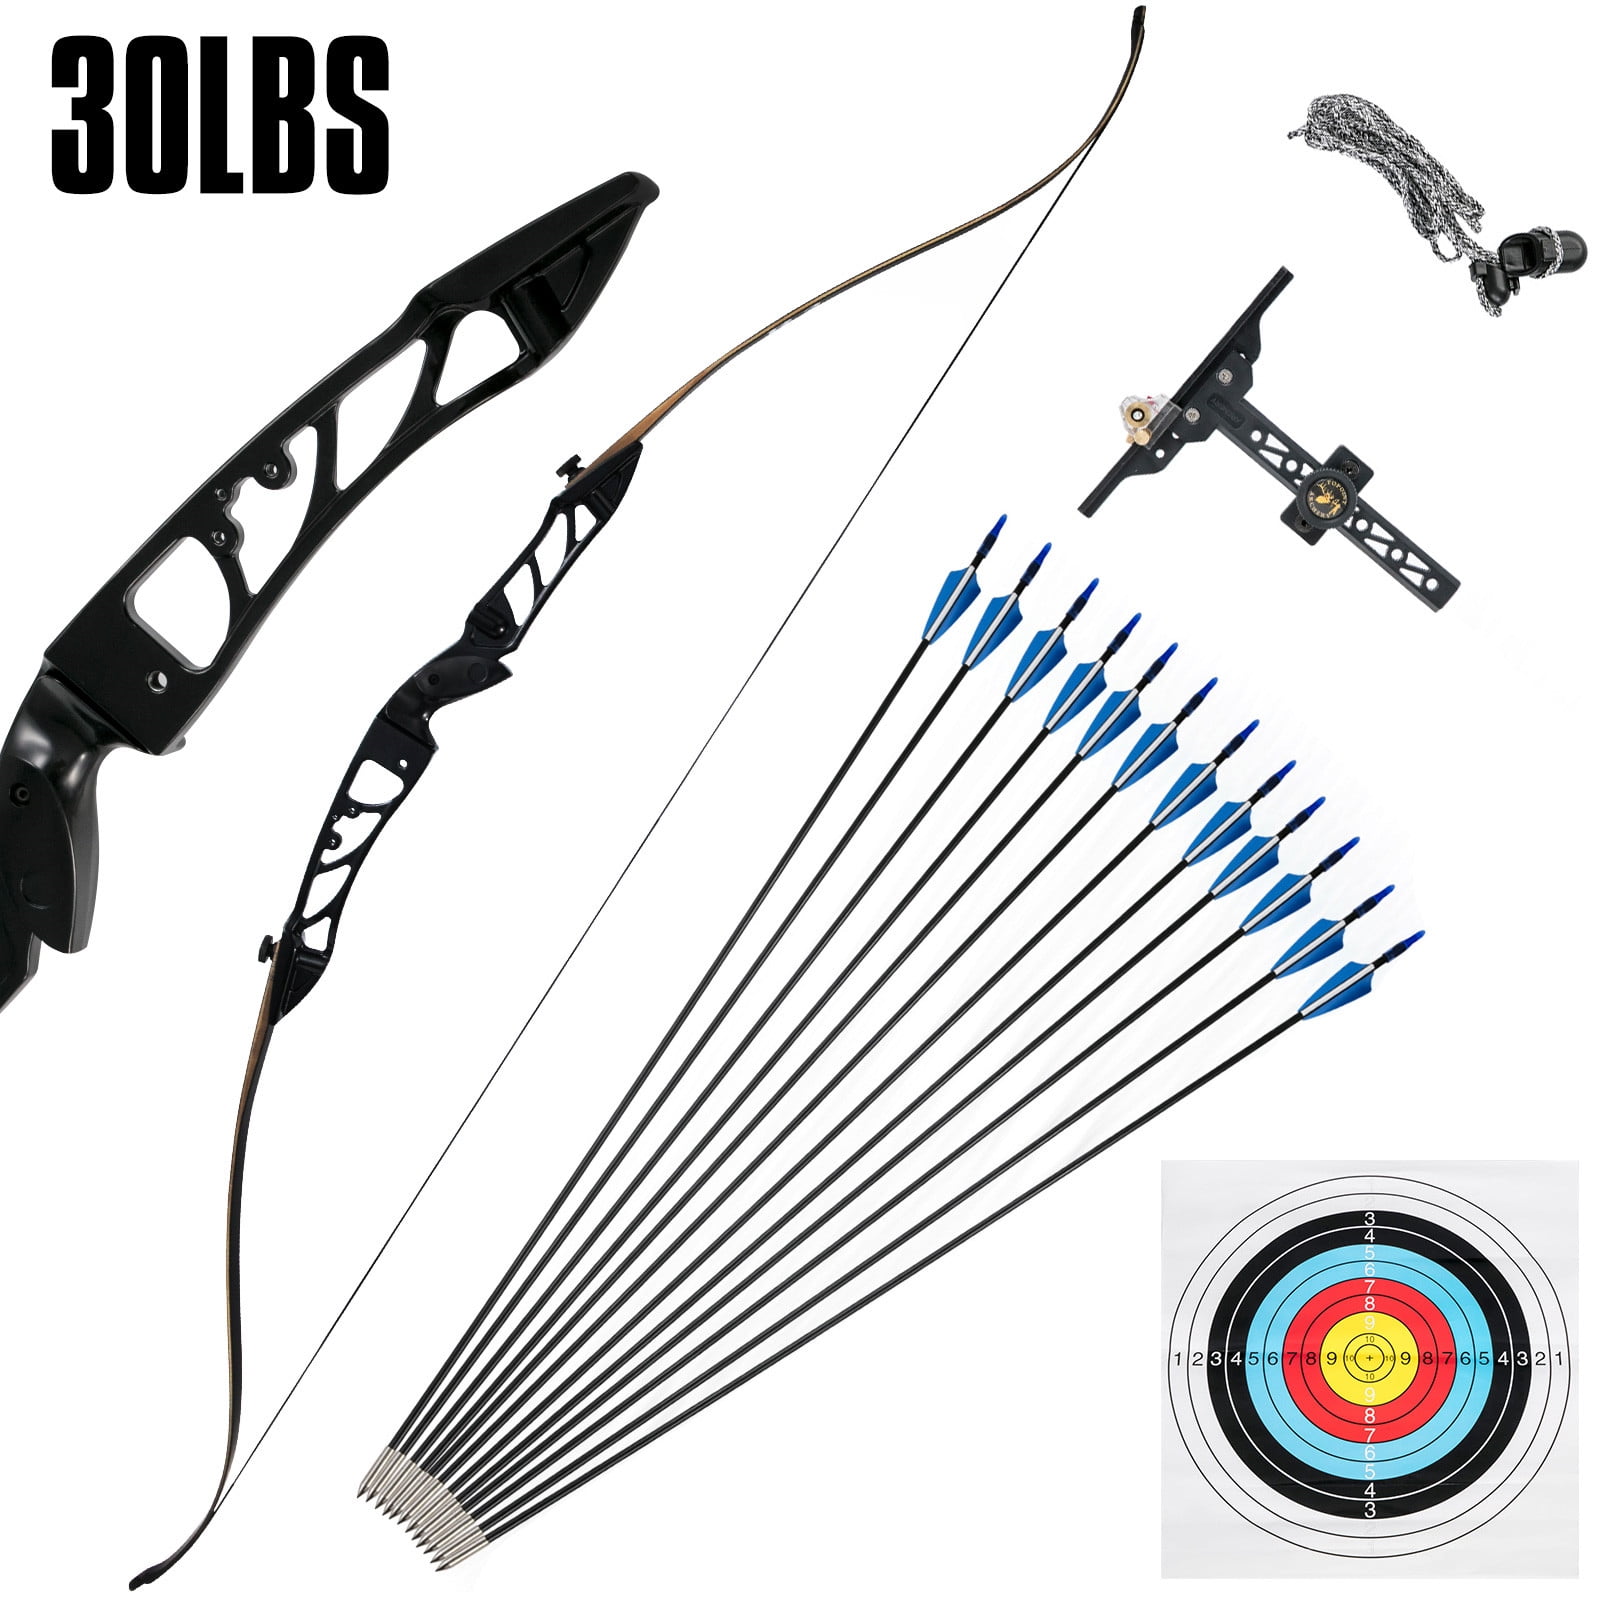 30-70lbs Archery Recurve Bow Longbow Sets Hunting Target & 12*Arrowsheads Camo 